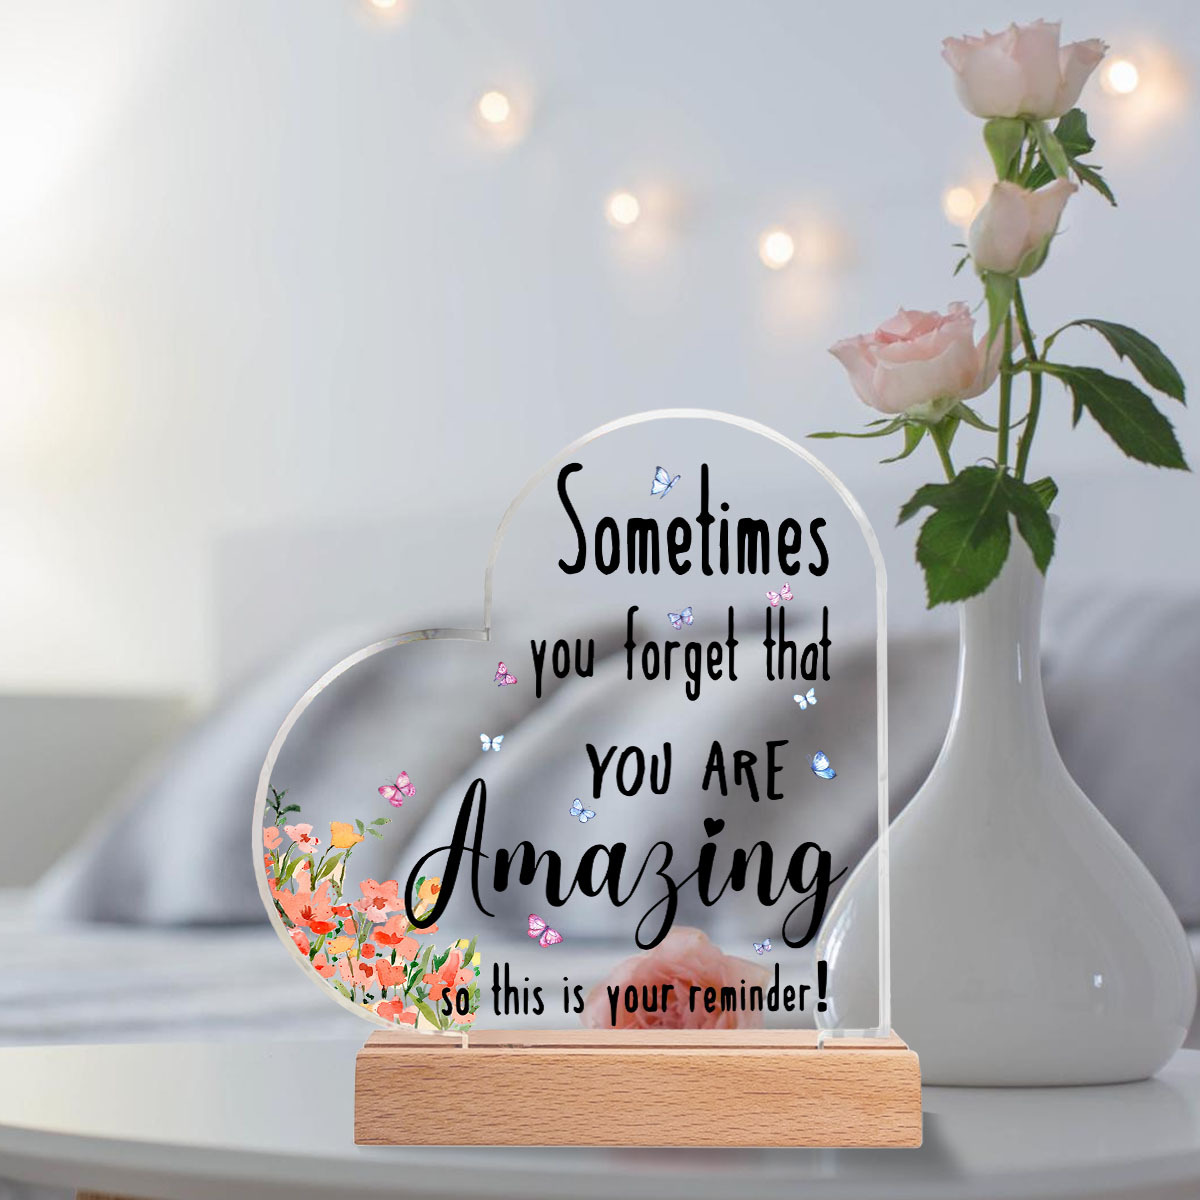 Inspirational Gifts for Women Birthday Thank You Gifts Graduation Appreciation Gifts for Women Friend Daughter Mom Coworker Sister Teachers